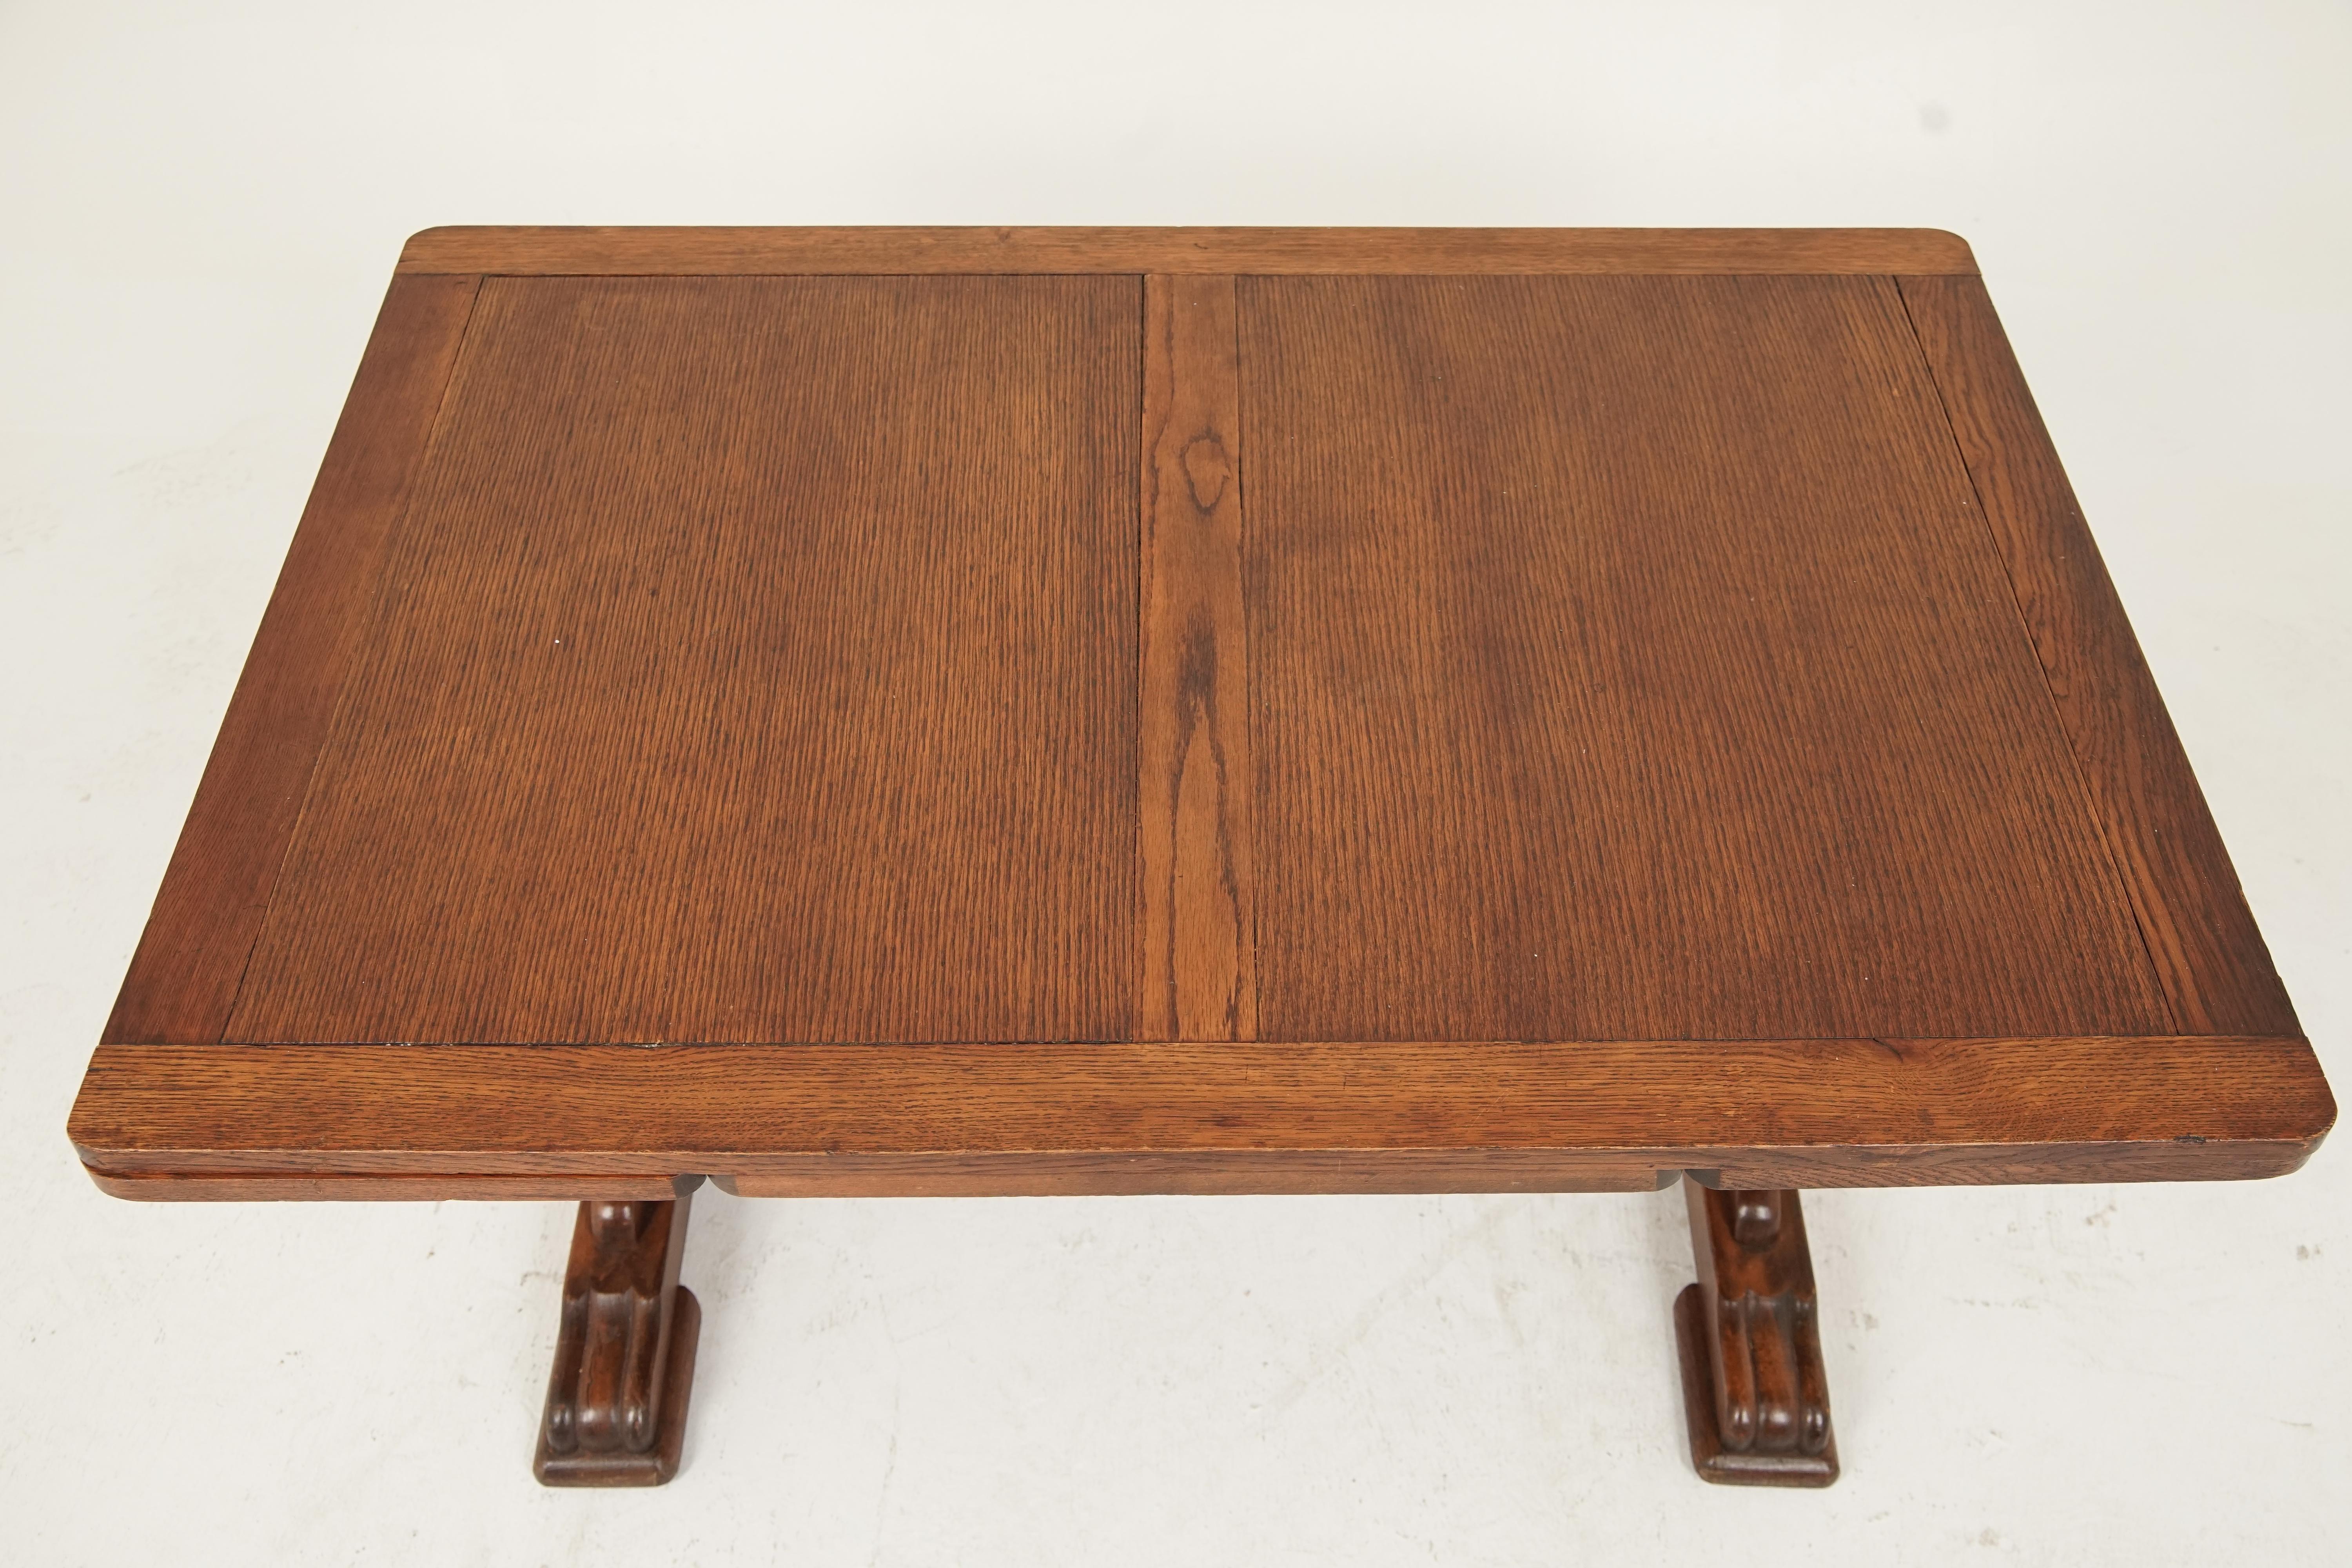 Antique Oak reduced refectory coffee table, Scotland 1930, B2734

Scotland 1930
Solid Oak and veneer
Original Finish
Rectangular top
Pair of pull out leaves on the ends
Standing on a pair of square columns
United by carved base
This table